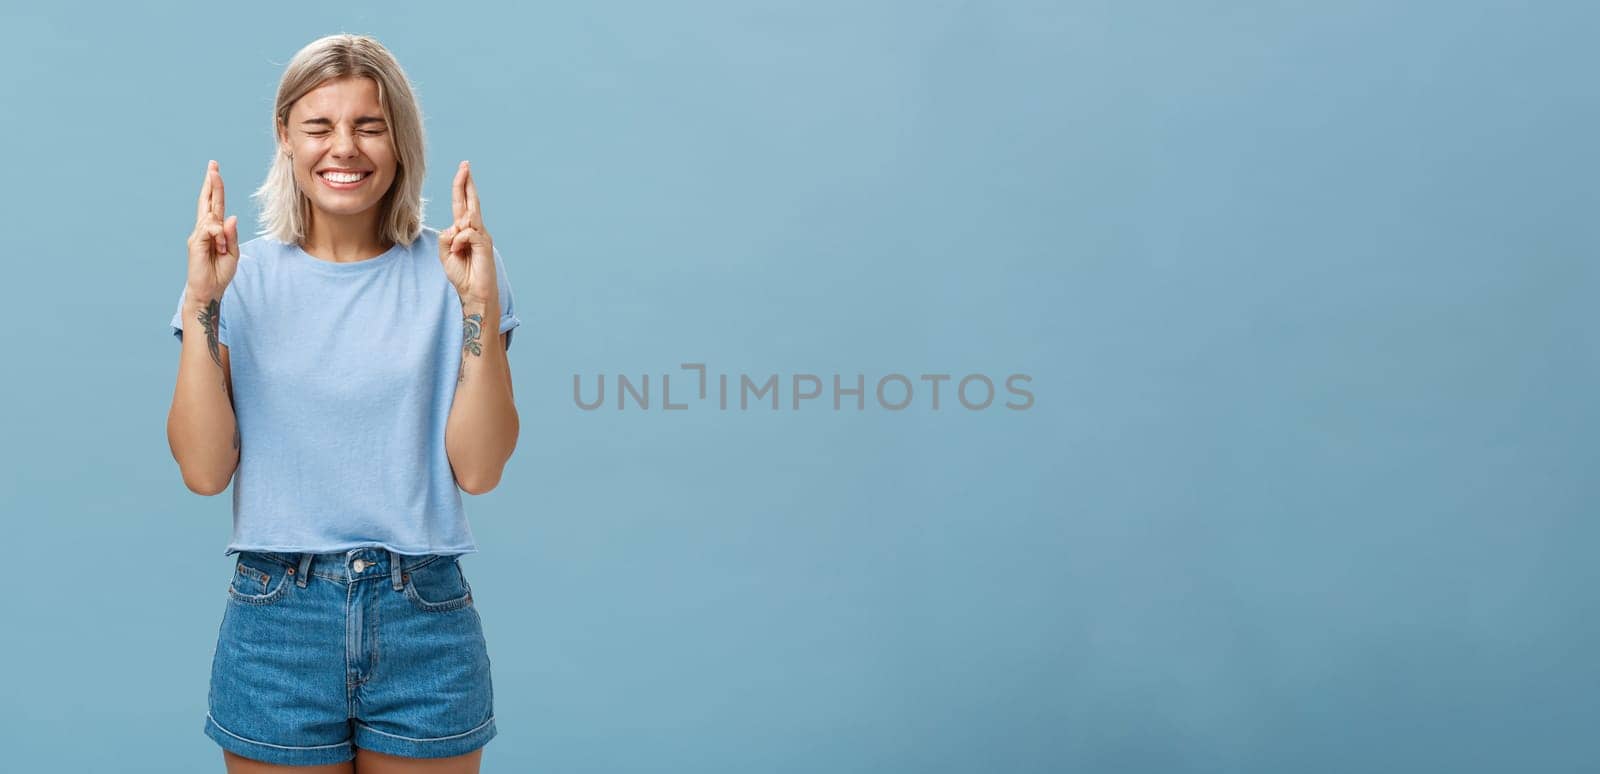 Optimistic faithful good-looking young woman with blond hair and tattoos smiling joyfully crossing fingers for good luck waiting for dream come true making wish while standing over blue background. Copy space